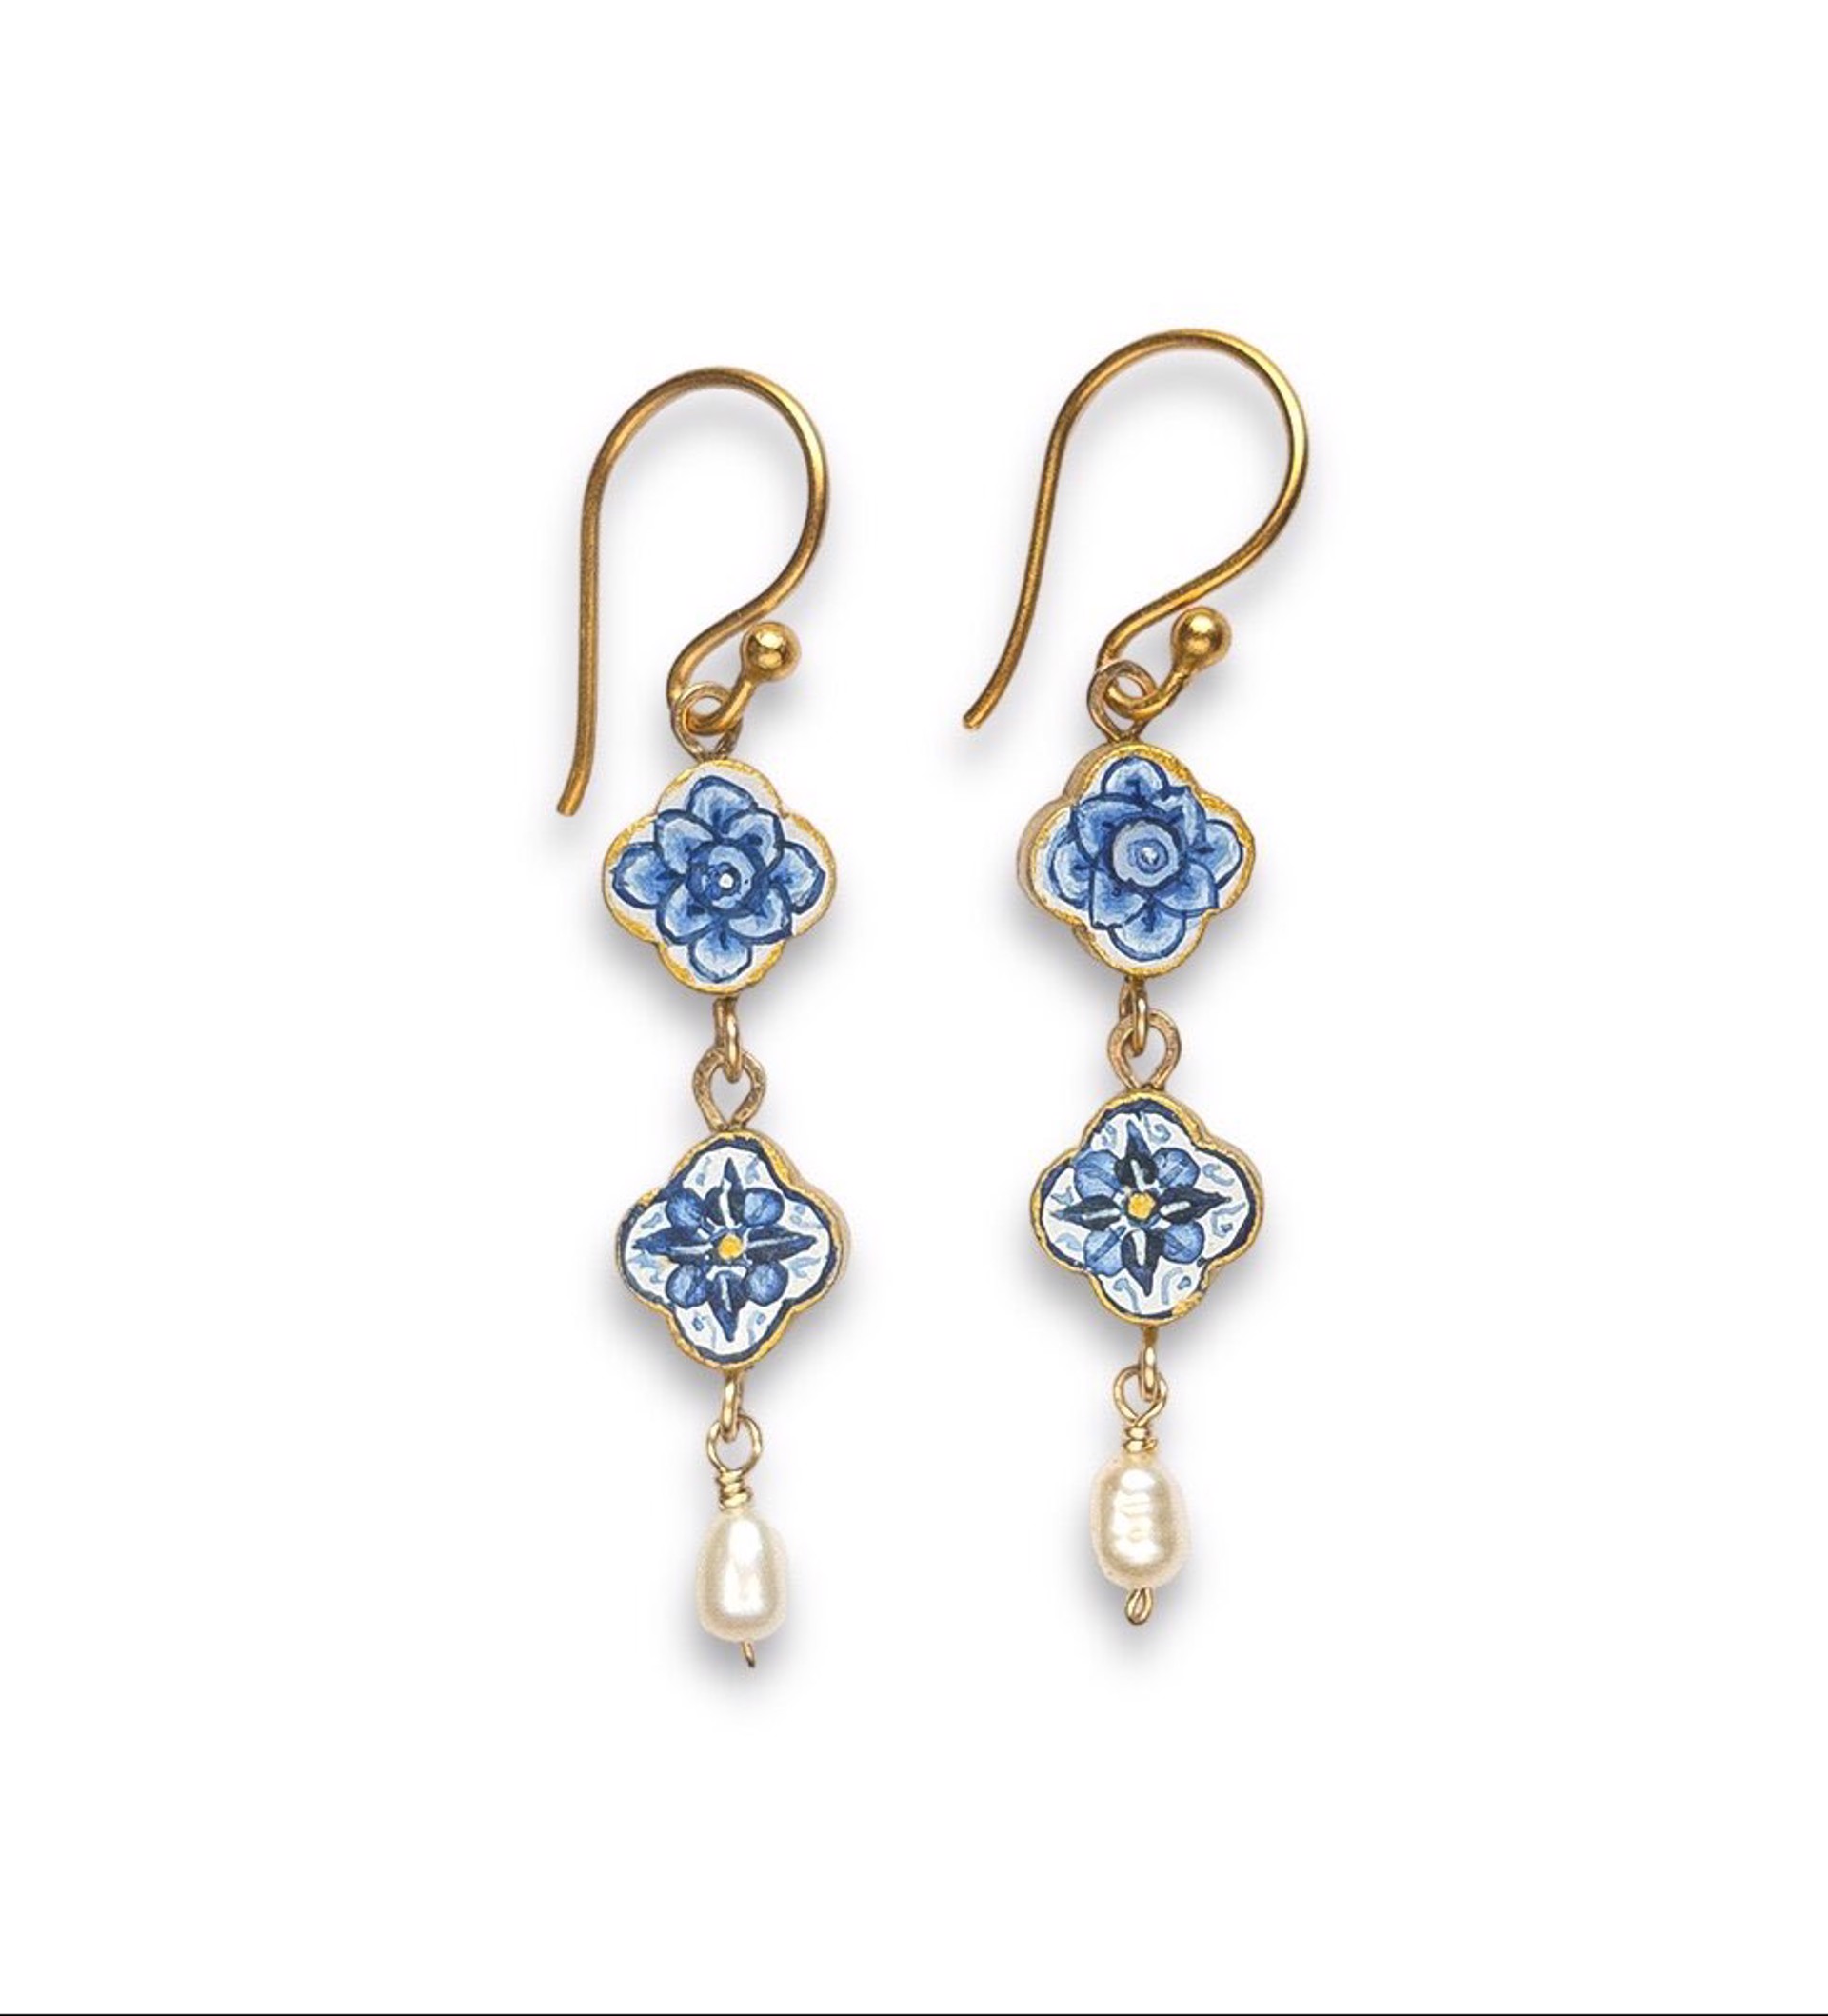 Blue and White Quatrefoil Earrings with Pearls by Christina Goodman